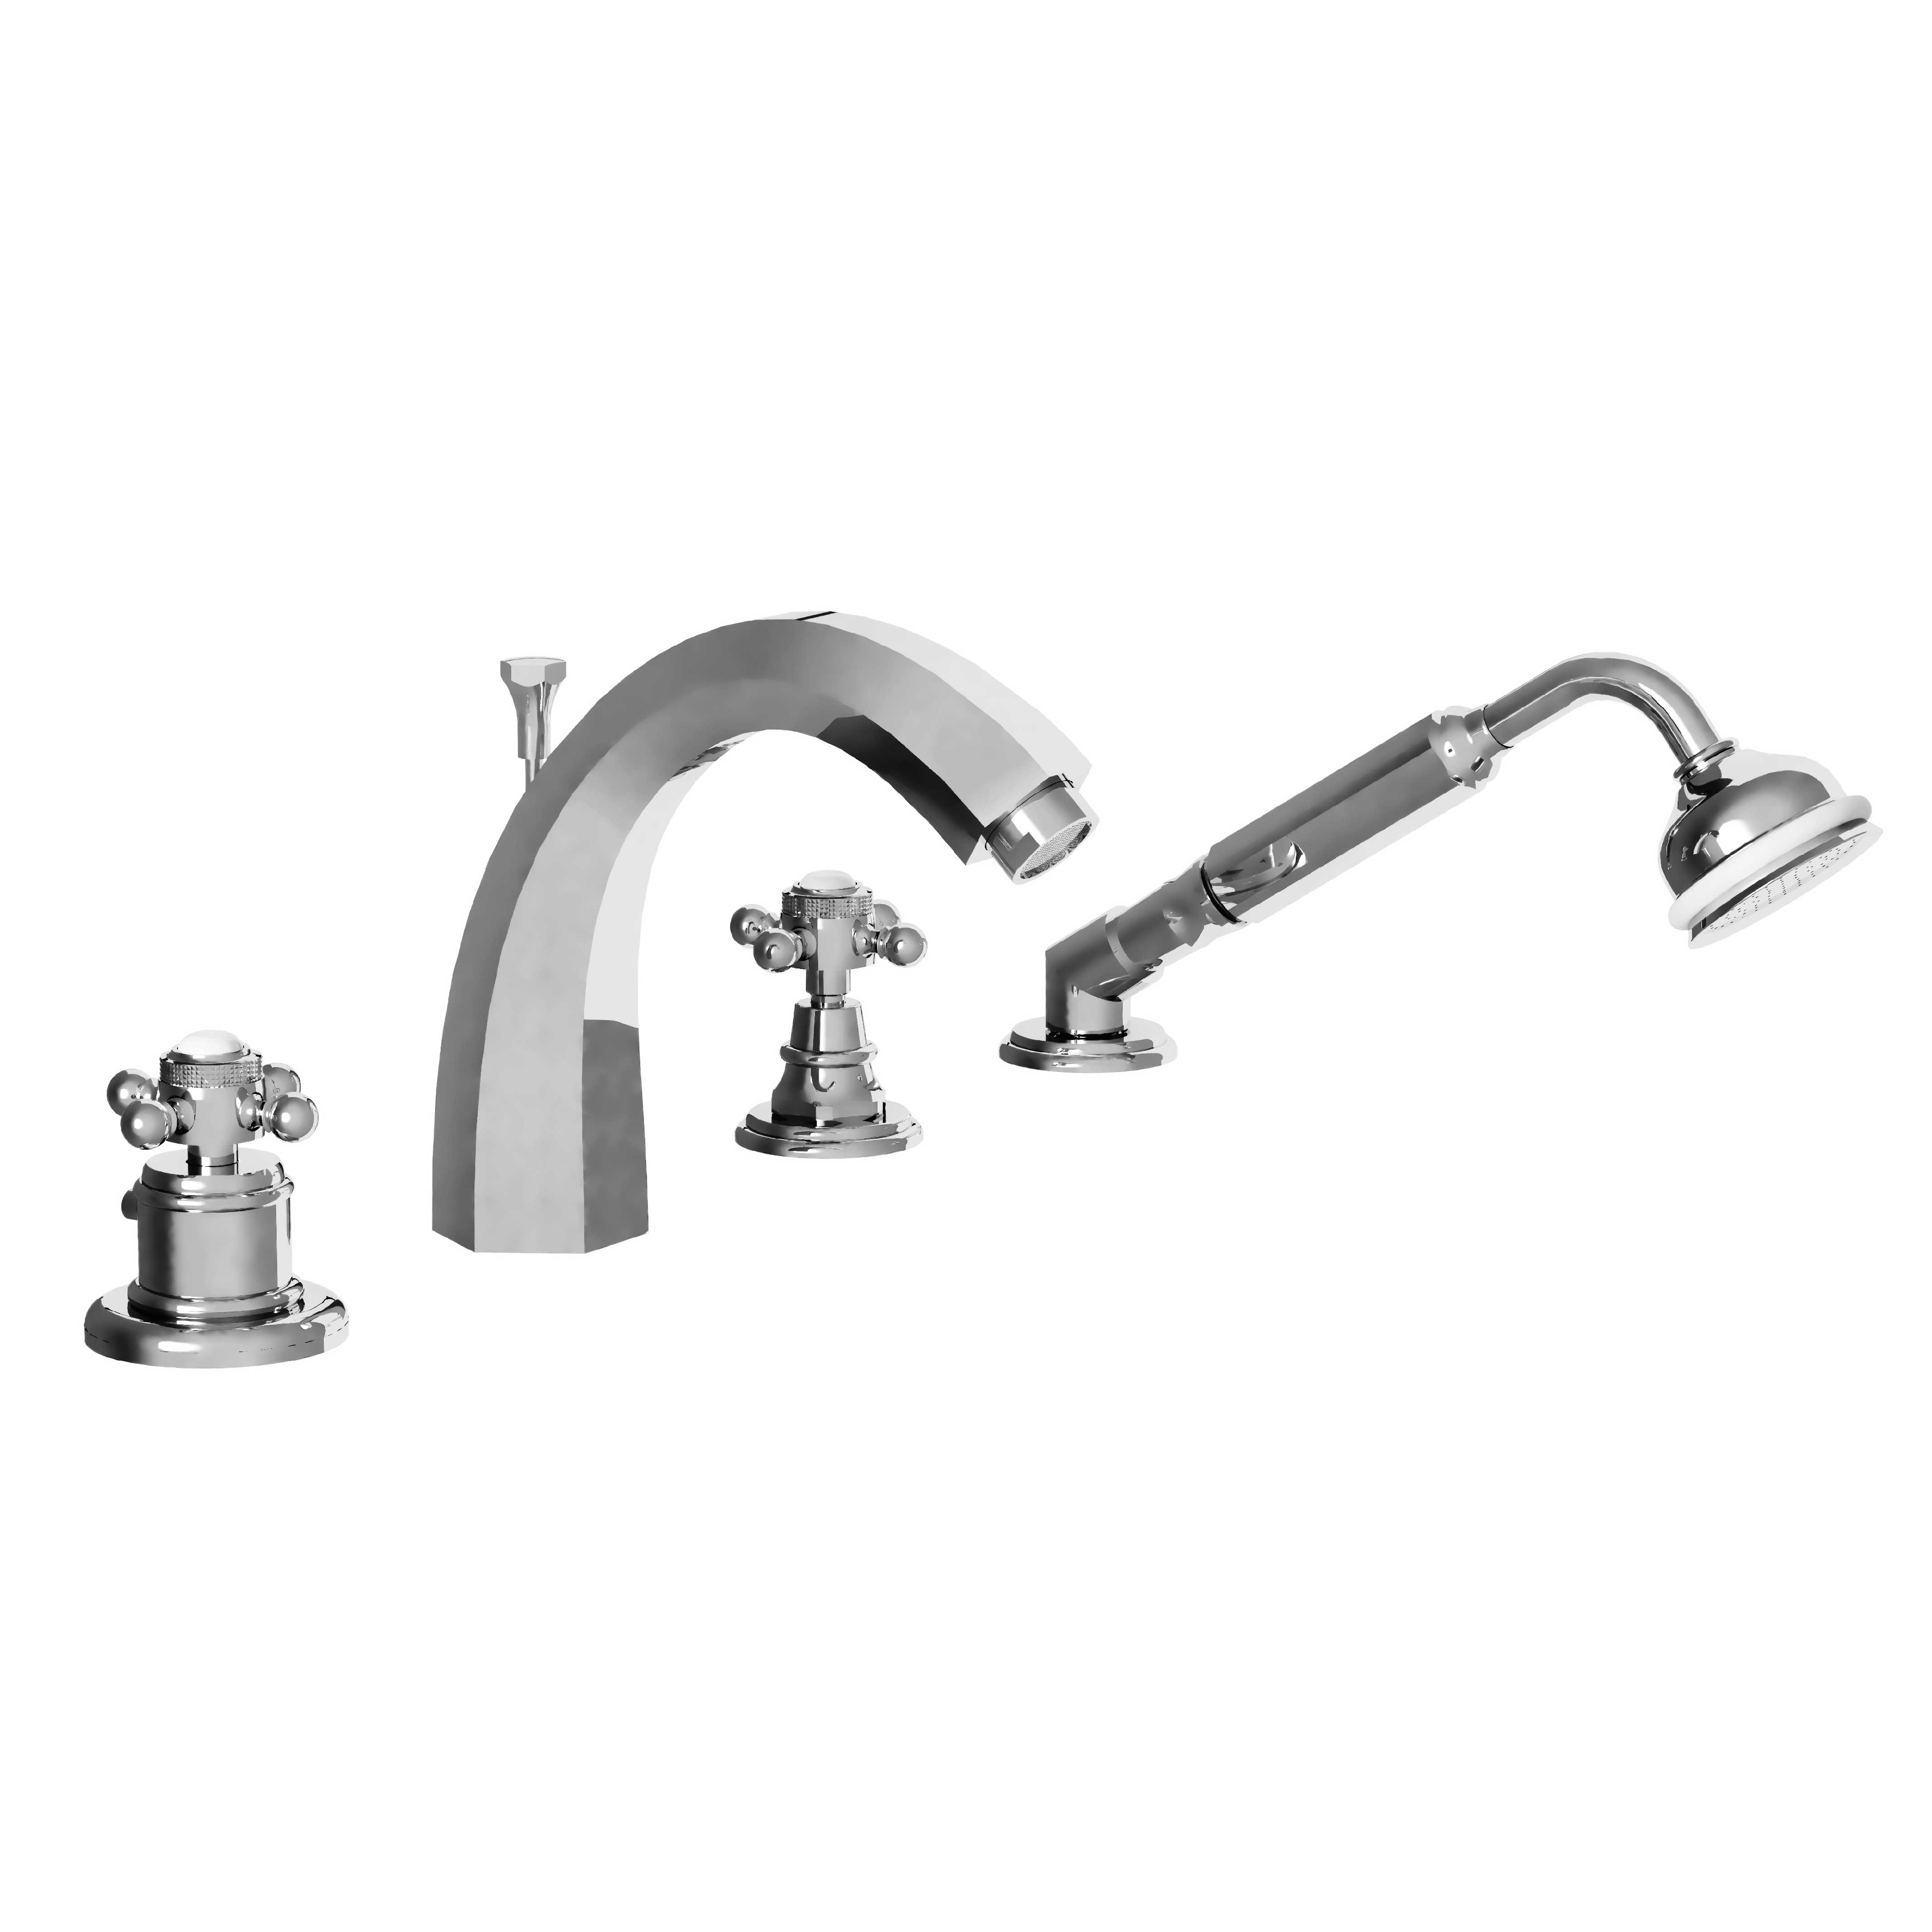 M30-3304TH 4-hole bath and shower thermo. mixer, high spout